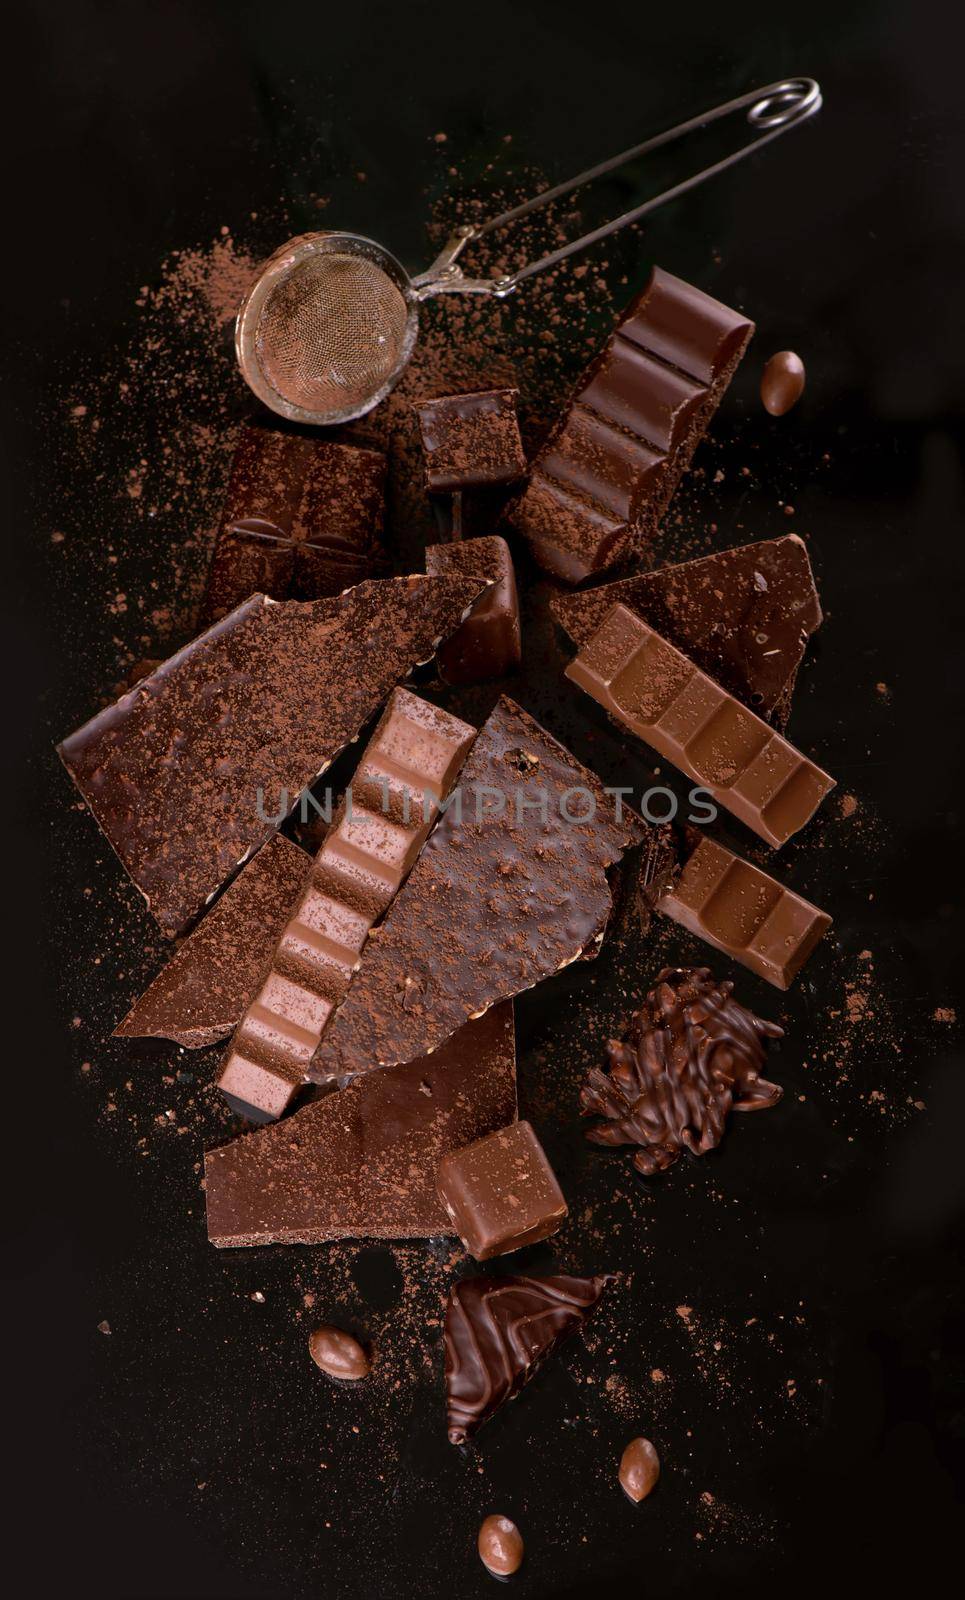 Broken chocolate pieces and cocoa powder on wooden background. by aprilphoto